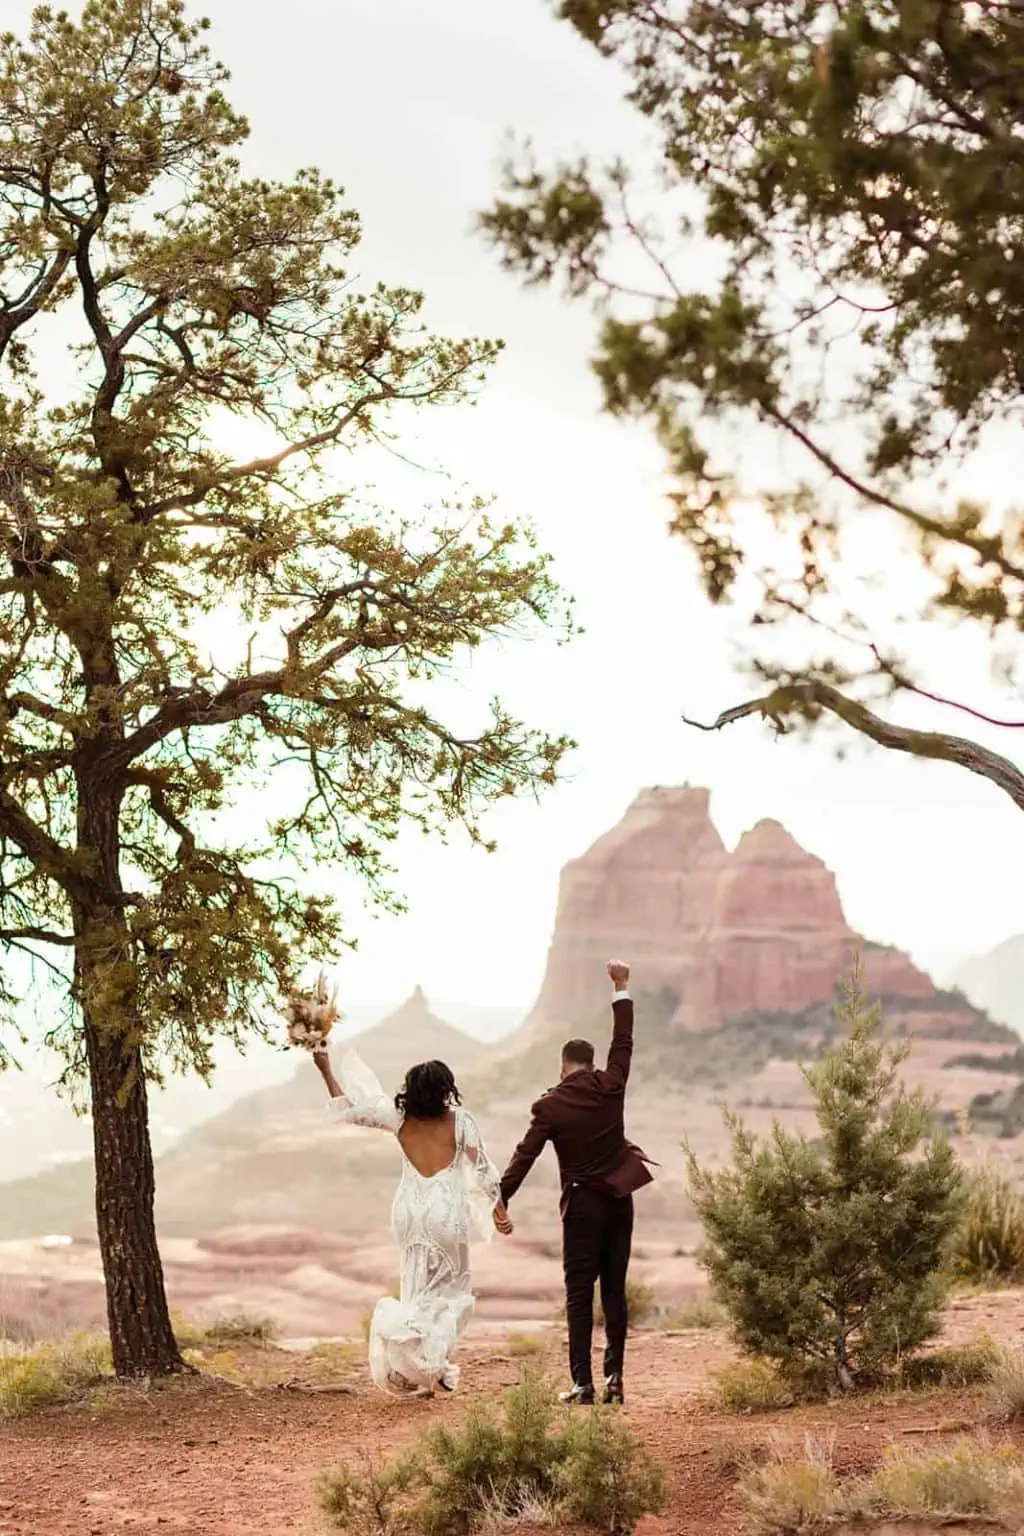 The bride and groom celebrate their ceremony as they walk towards the red rock views